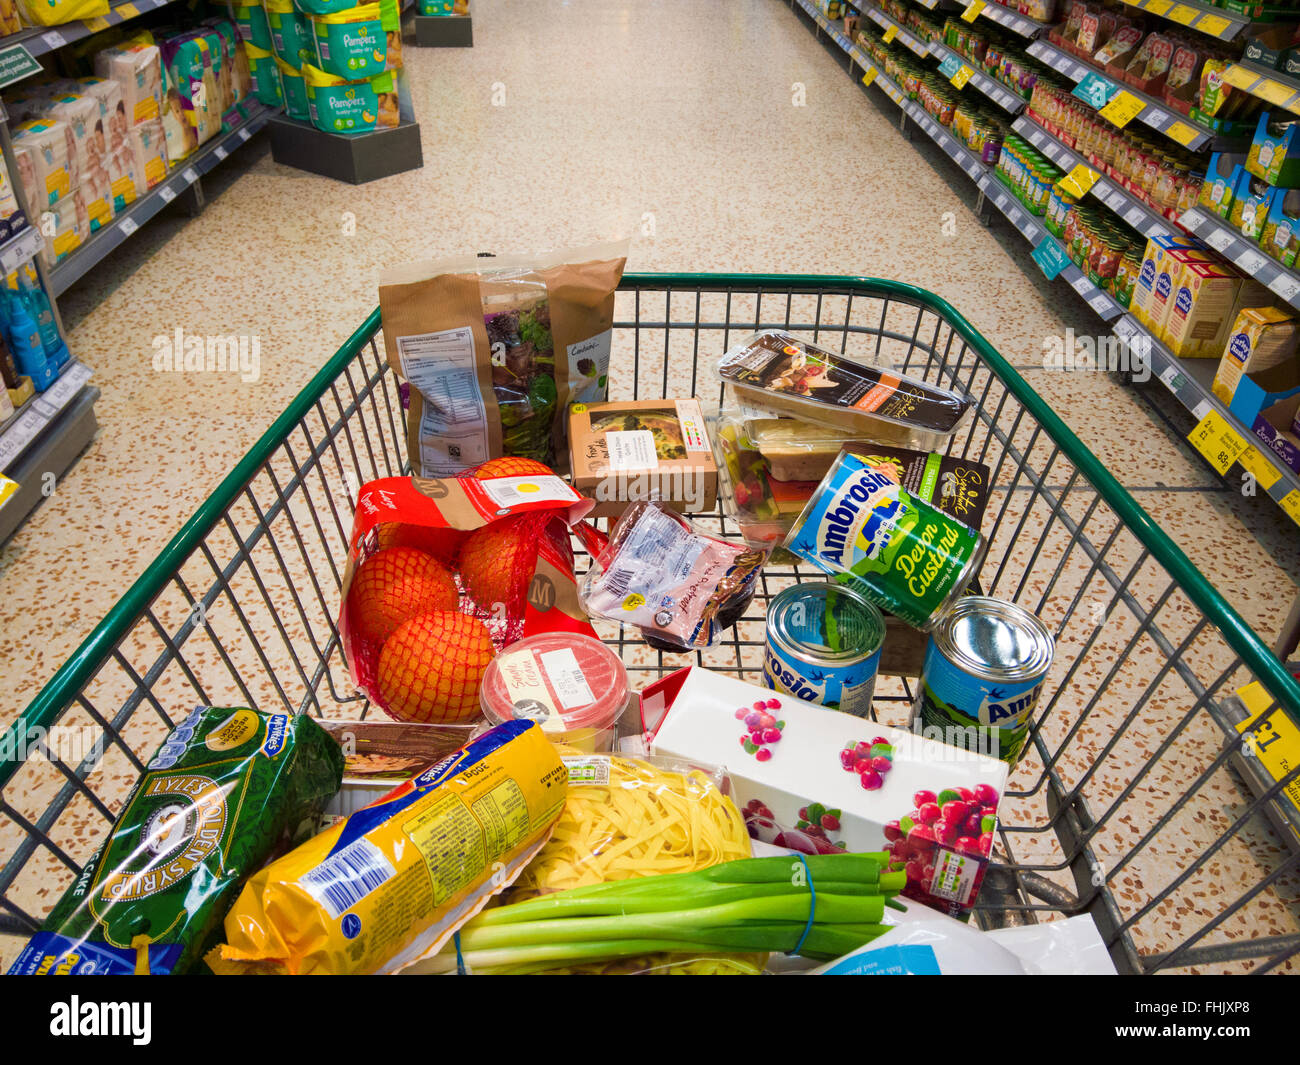 Shopping trolley containing groceries in a supermarket aisle. Stock Photo